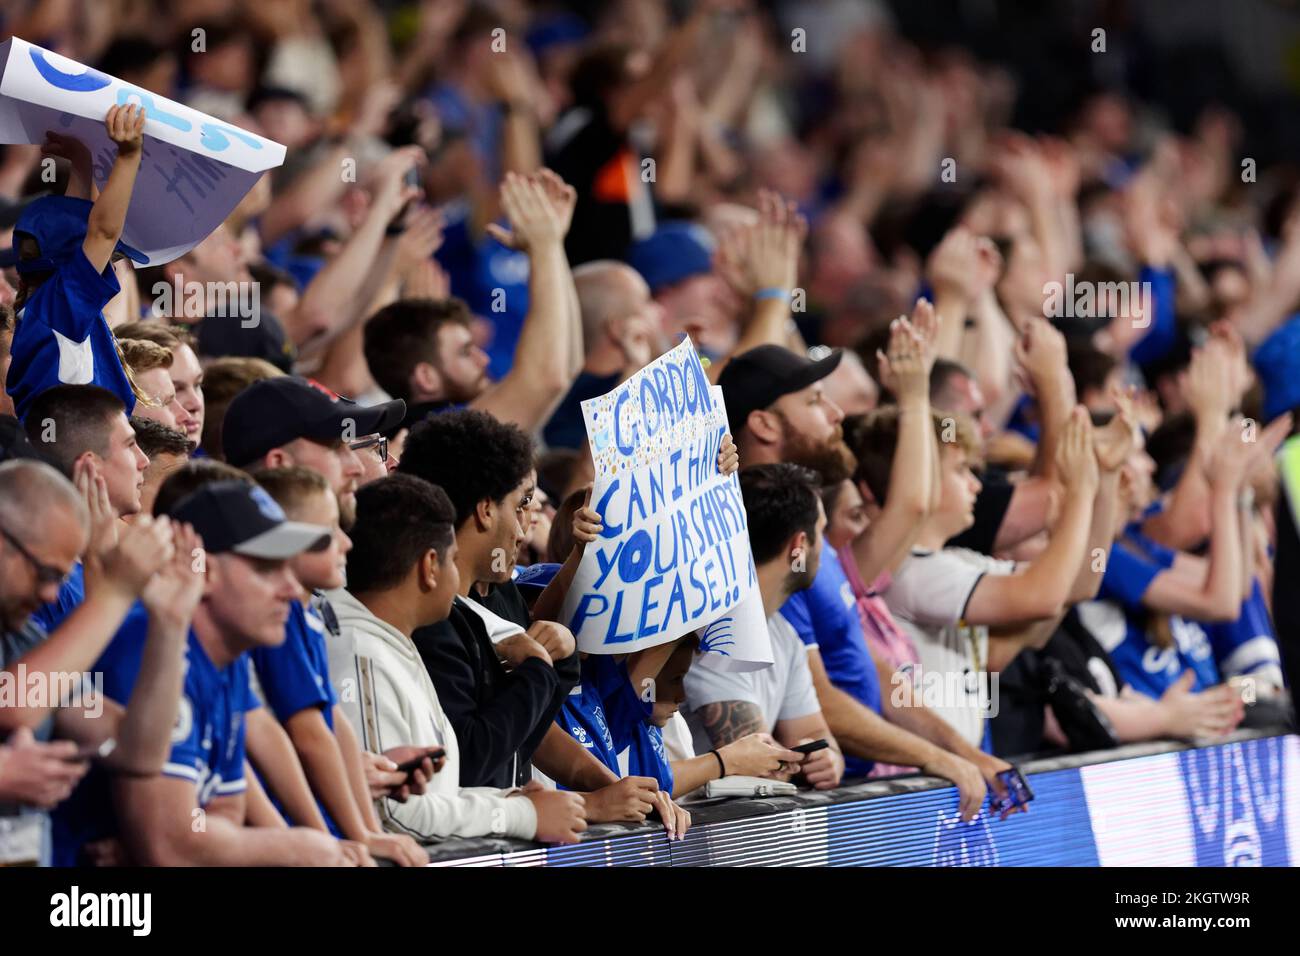 Sydney, Australia. 23rd Nov, 2022. SYDNEY, AUSTRALIA - NOVEMBER 23: Everton FC fans supporting their team during the match between Everton and Wanderers at CommBank Stadium on November 23, 2022 in Sydney, Australia Credit: IOIO IMAGES/Alamy Live News Stock Photo